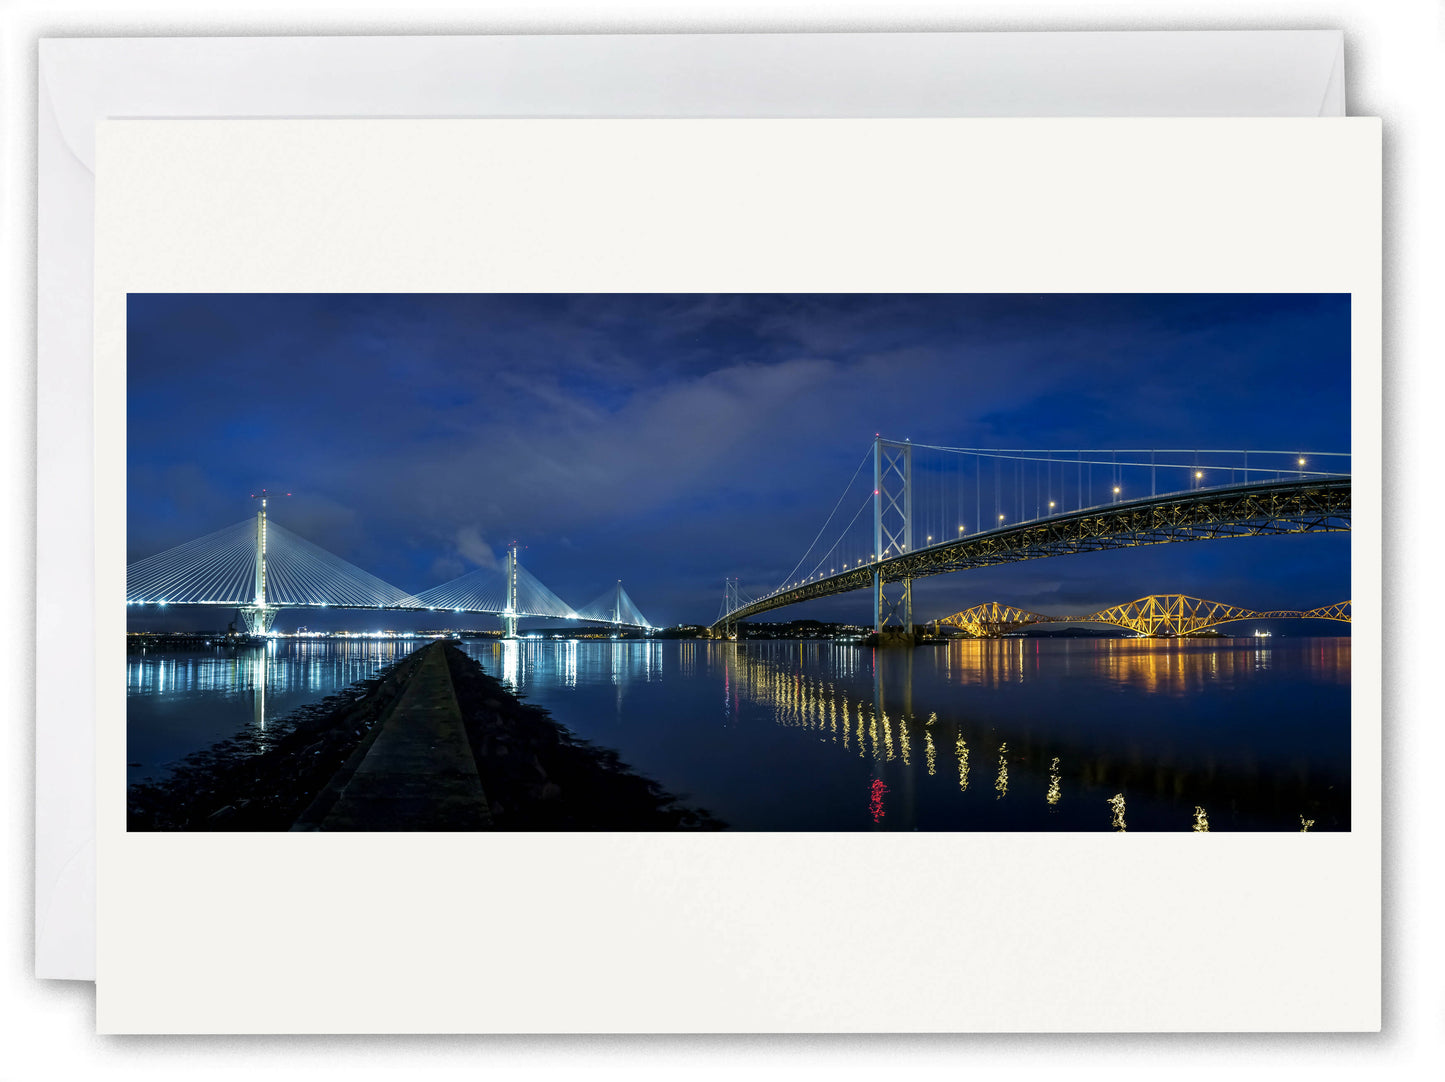 The Three Bridges over Firth of Forth - Scotland Greeting Card - Blank Inside